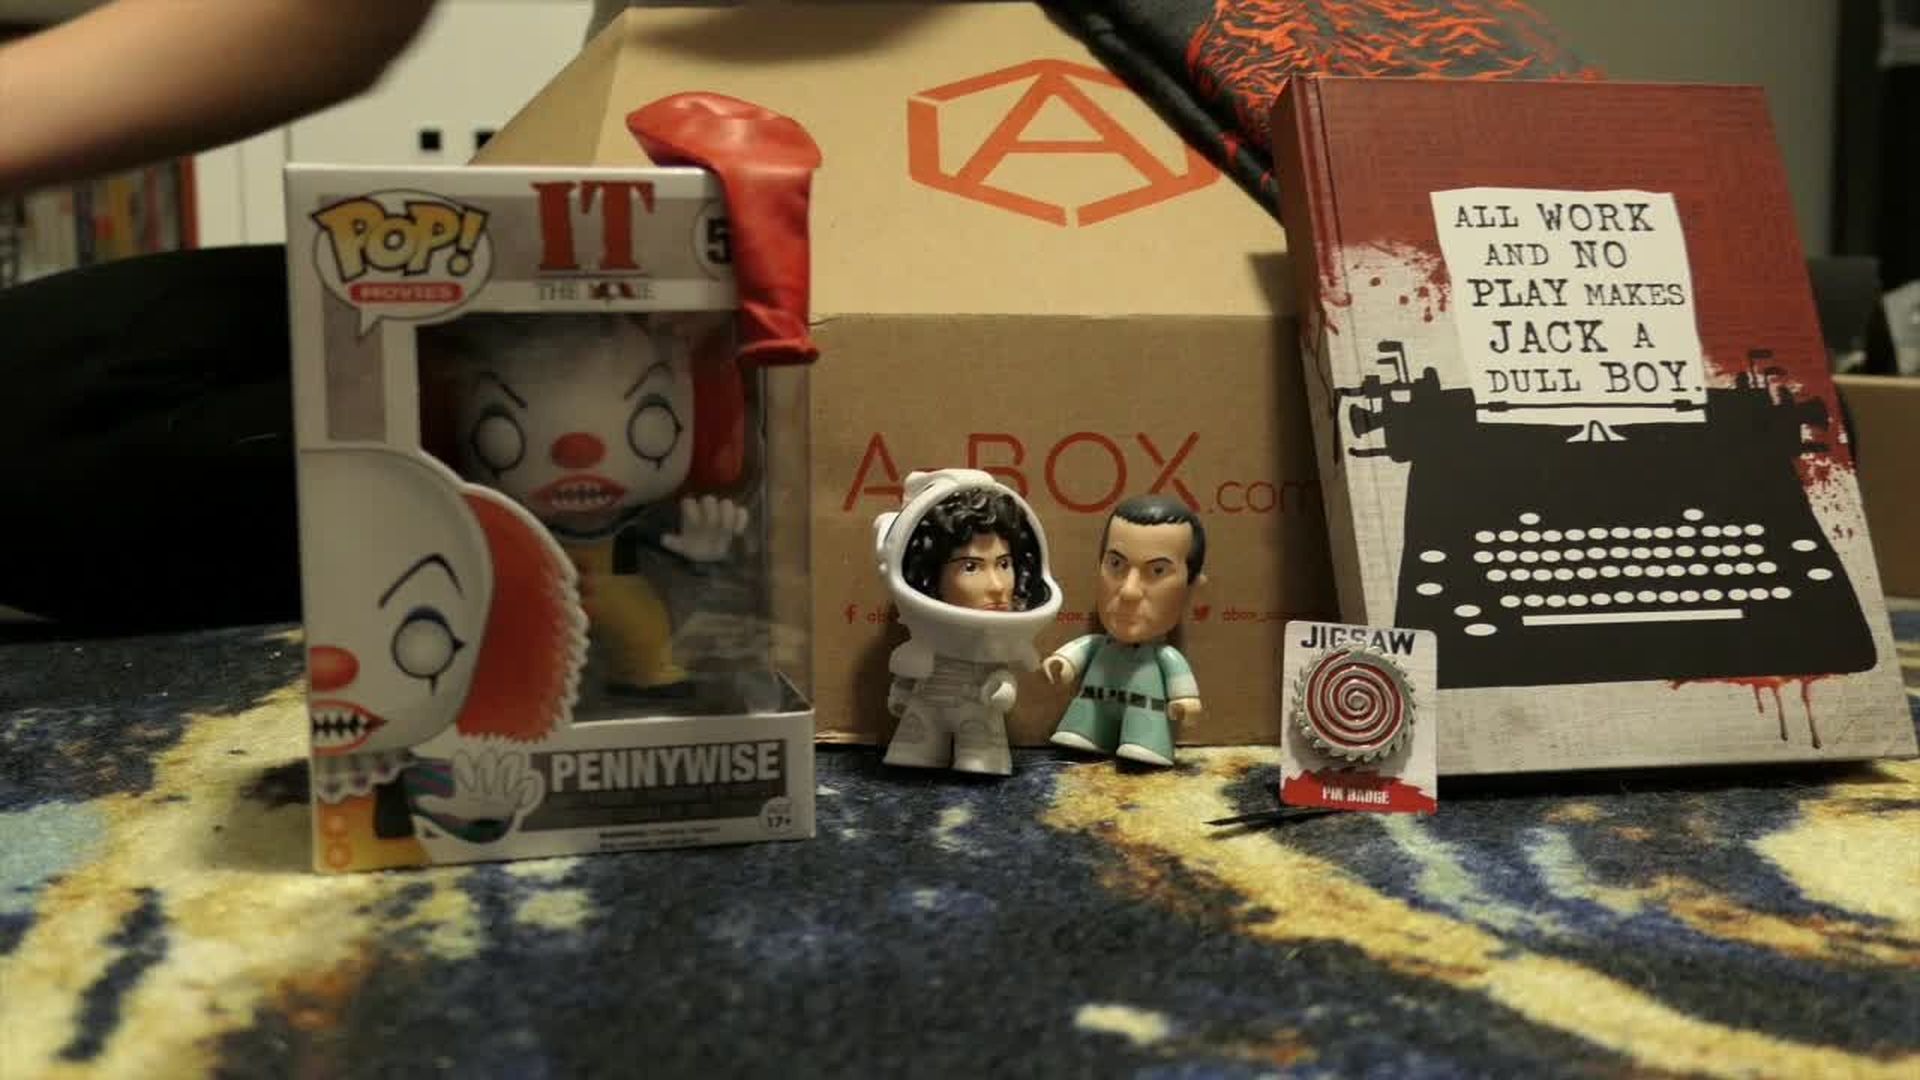 Geek Girl Review: A-BOX Subscription Horror Edition